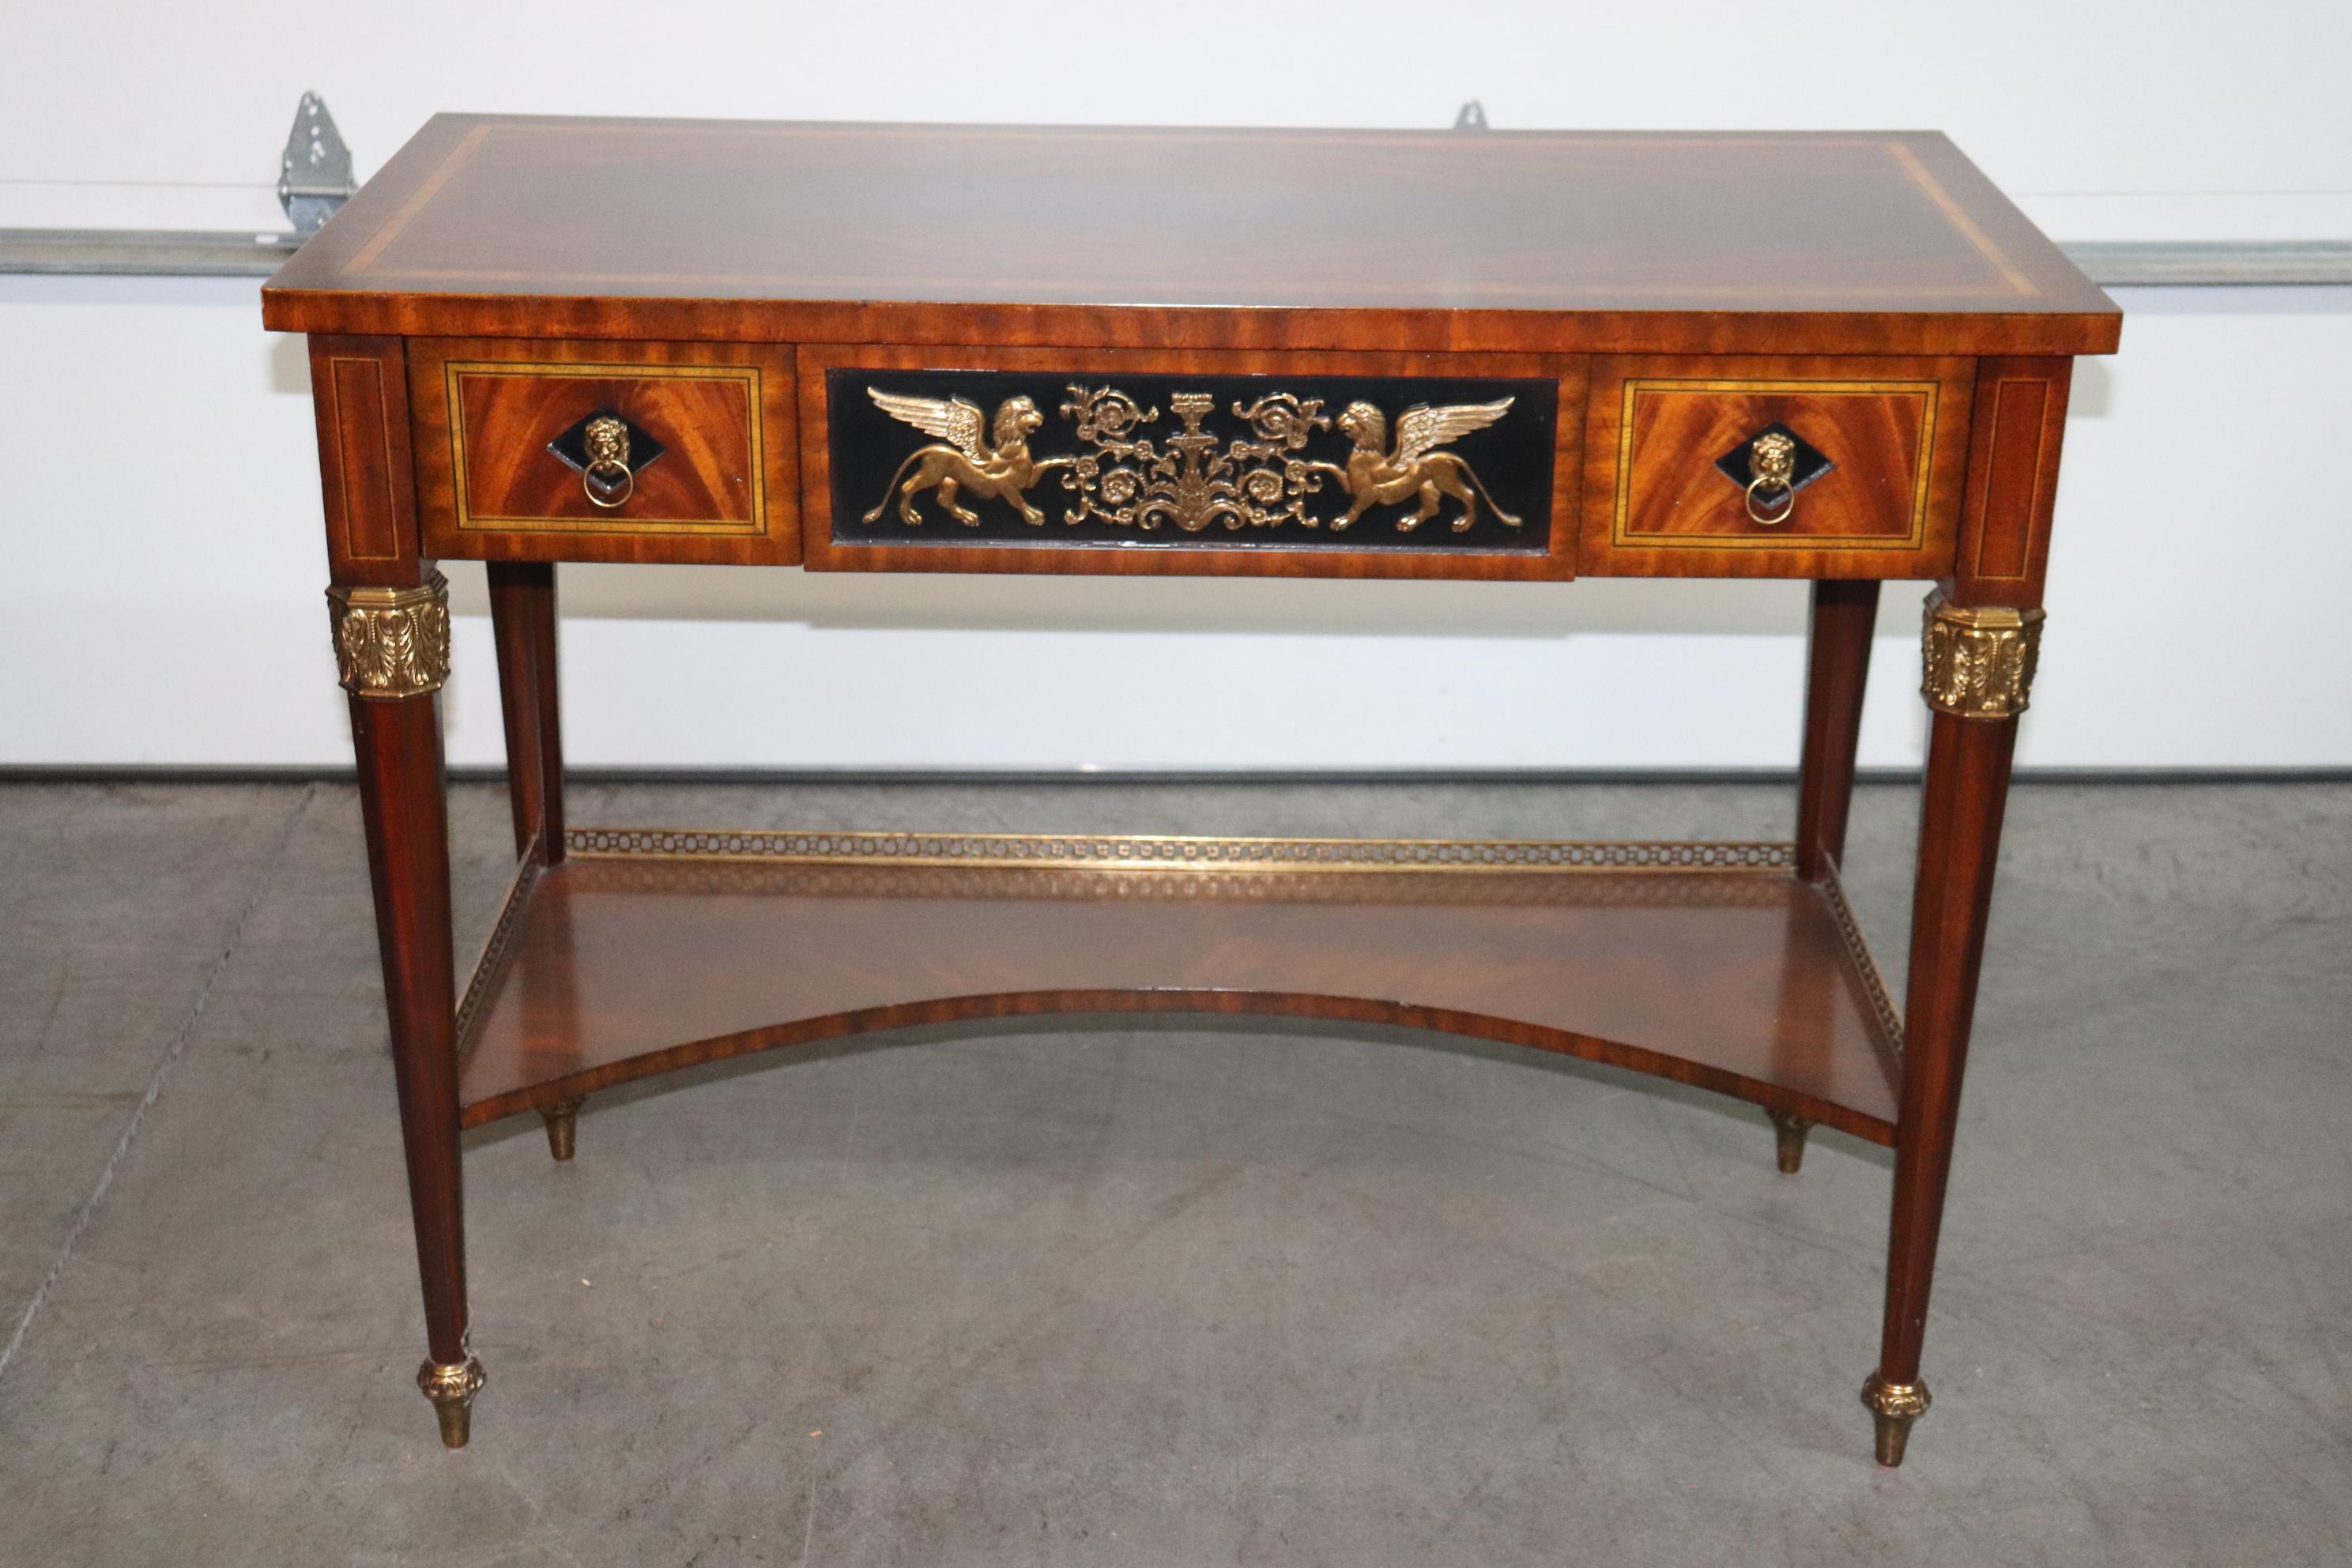 This is a stunning flame mahogany and bronze mounted console table in the French Empire style with winged griffins and beautiful bronze ormolu. The table is in good vintage condition with no major flaws or issues of any kind to mention. The table